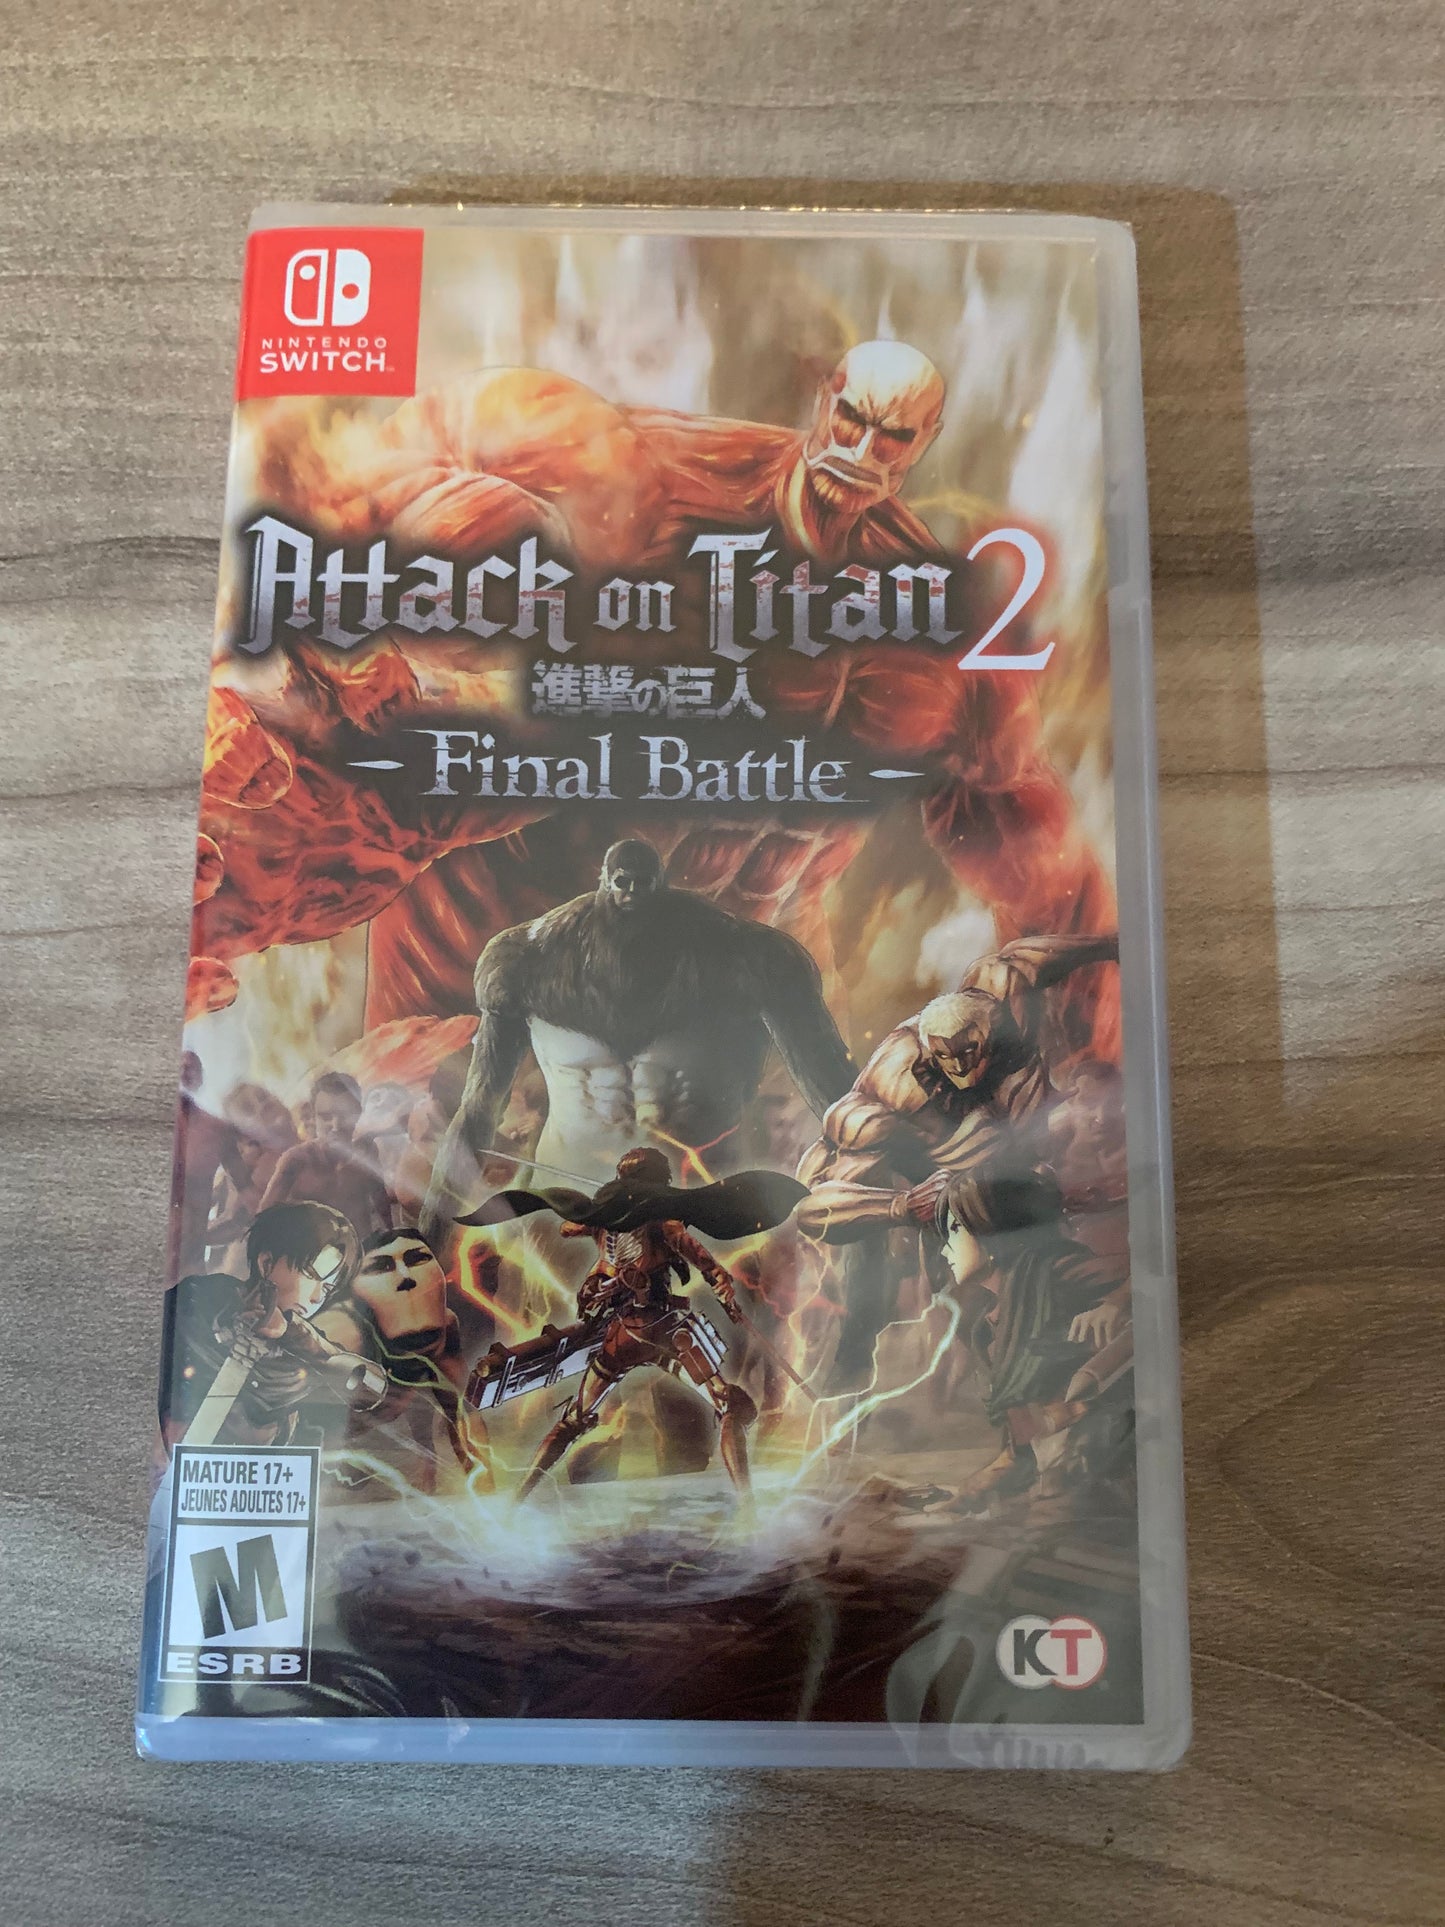 PiXEL-RETRO.COM : NINTENDO SWITCH NEW SEALED IN BOX COMPLETE MANUAL GAME NTSC ATTACK ON TITAN 2 FINAL BATTLE